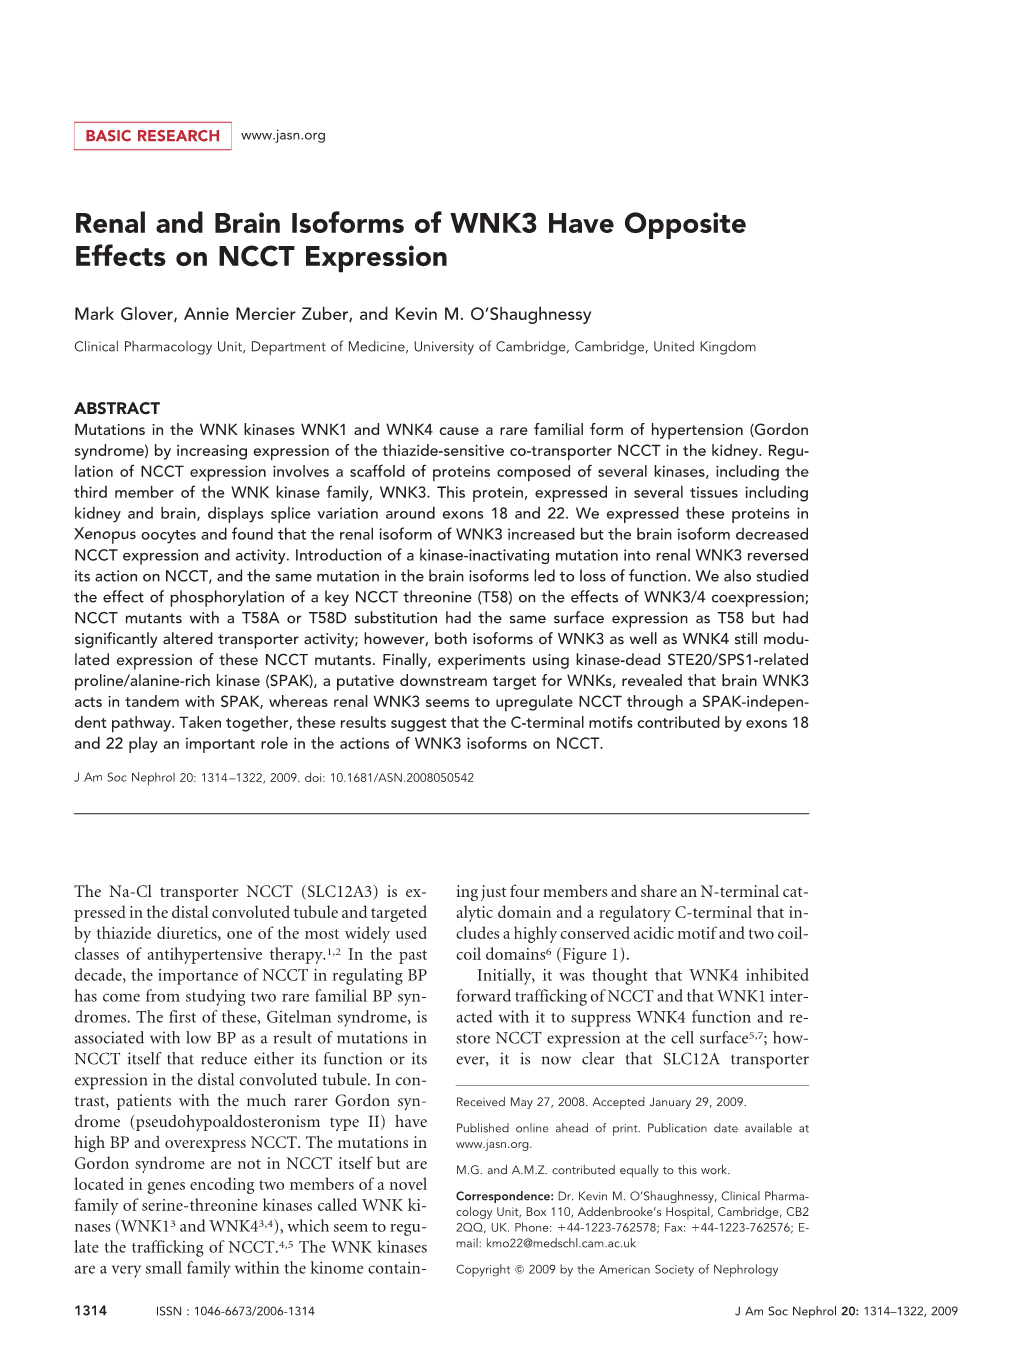 Renal and Brain Isoforms of WNK3 Have Opposite Effects on NCCT Expression